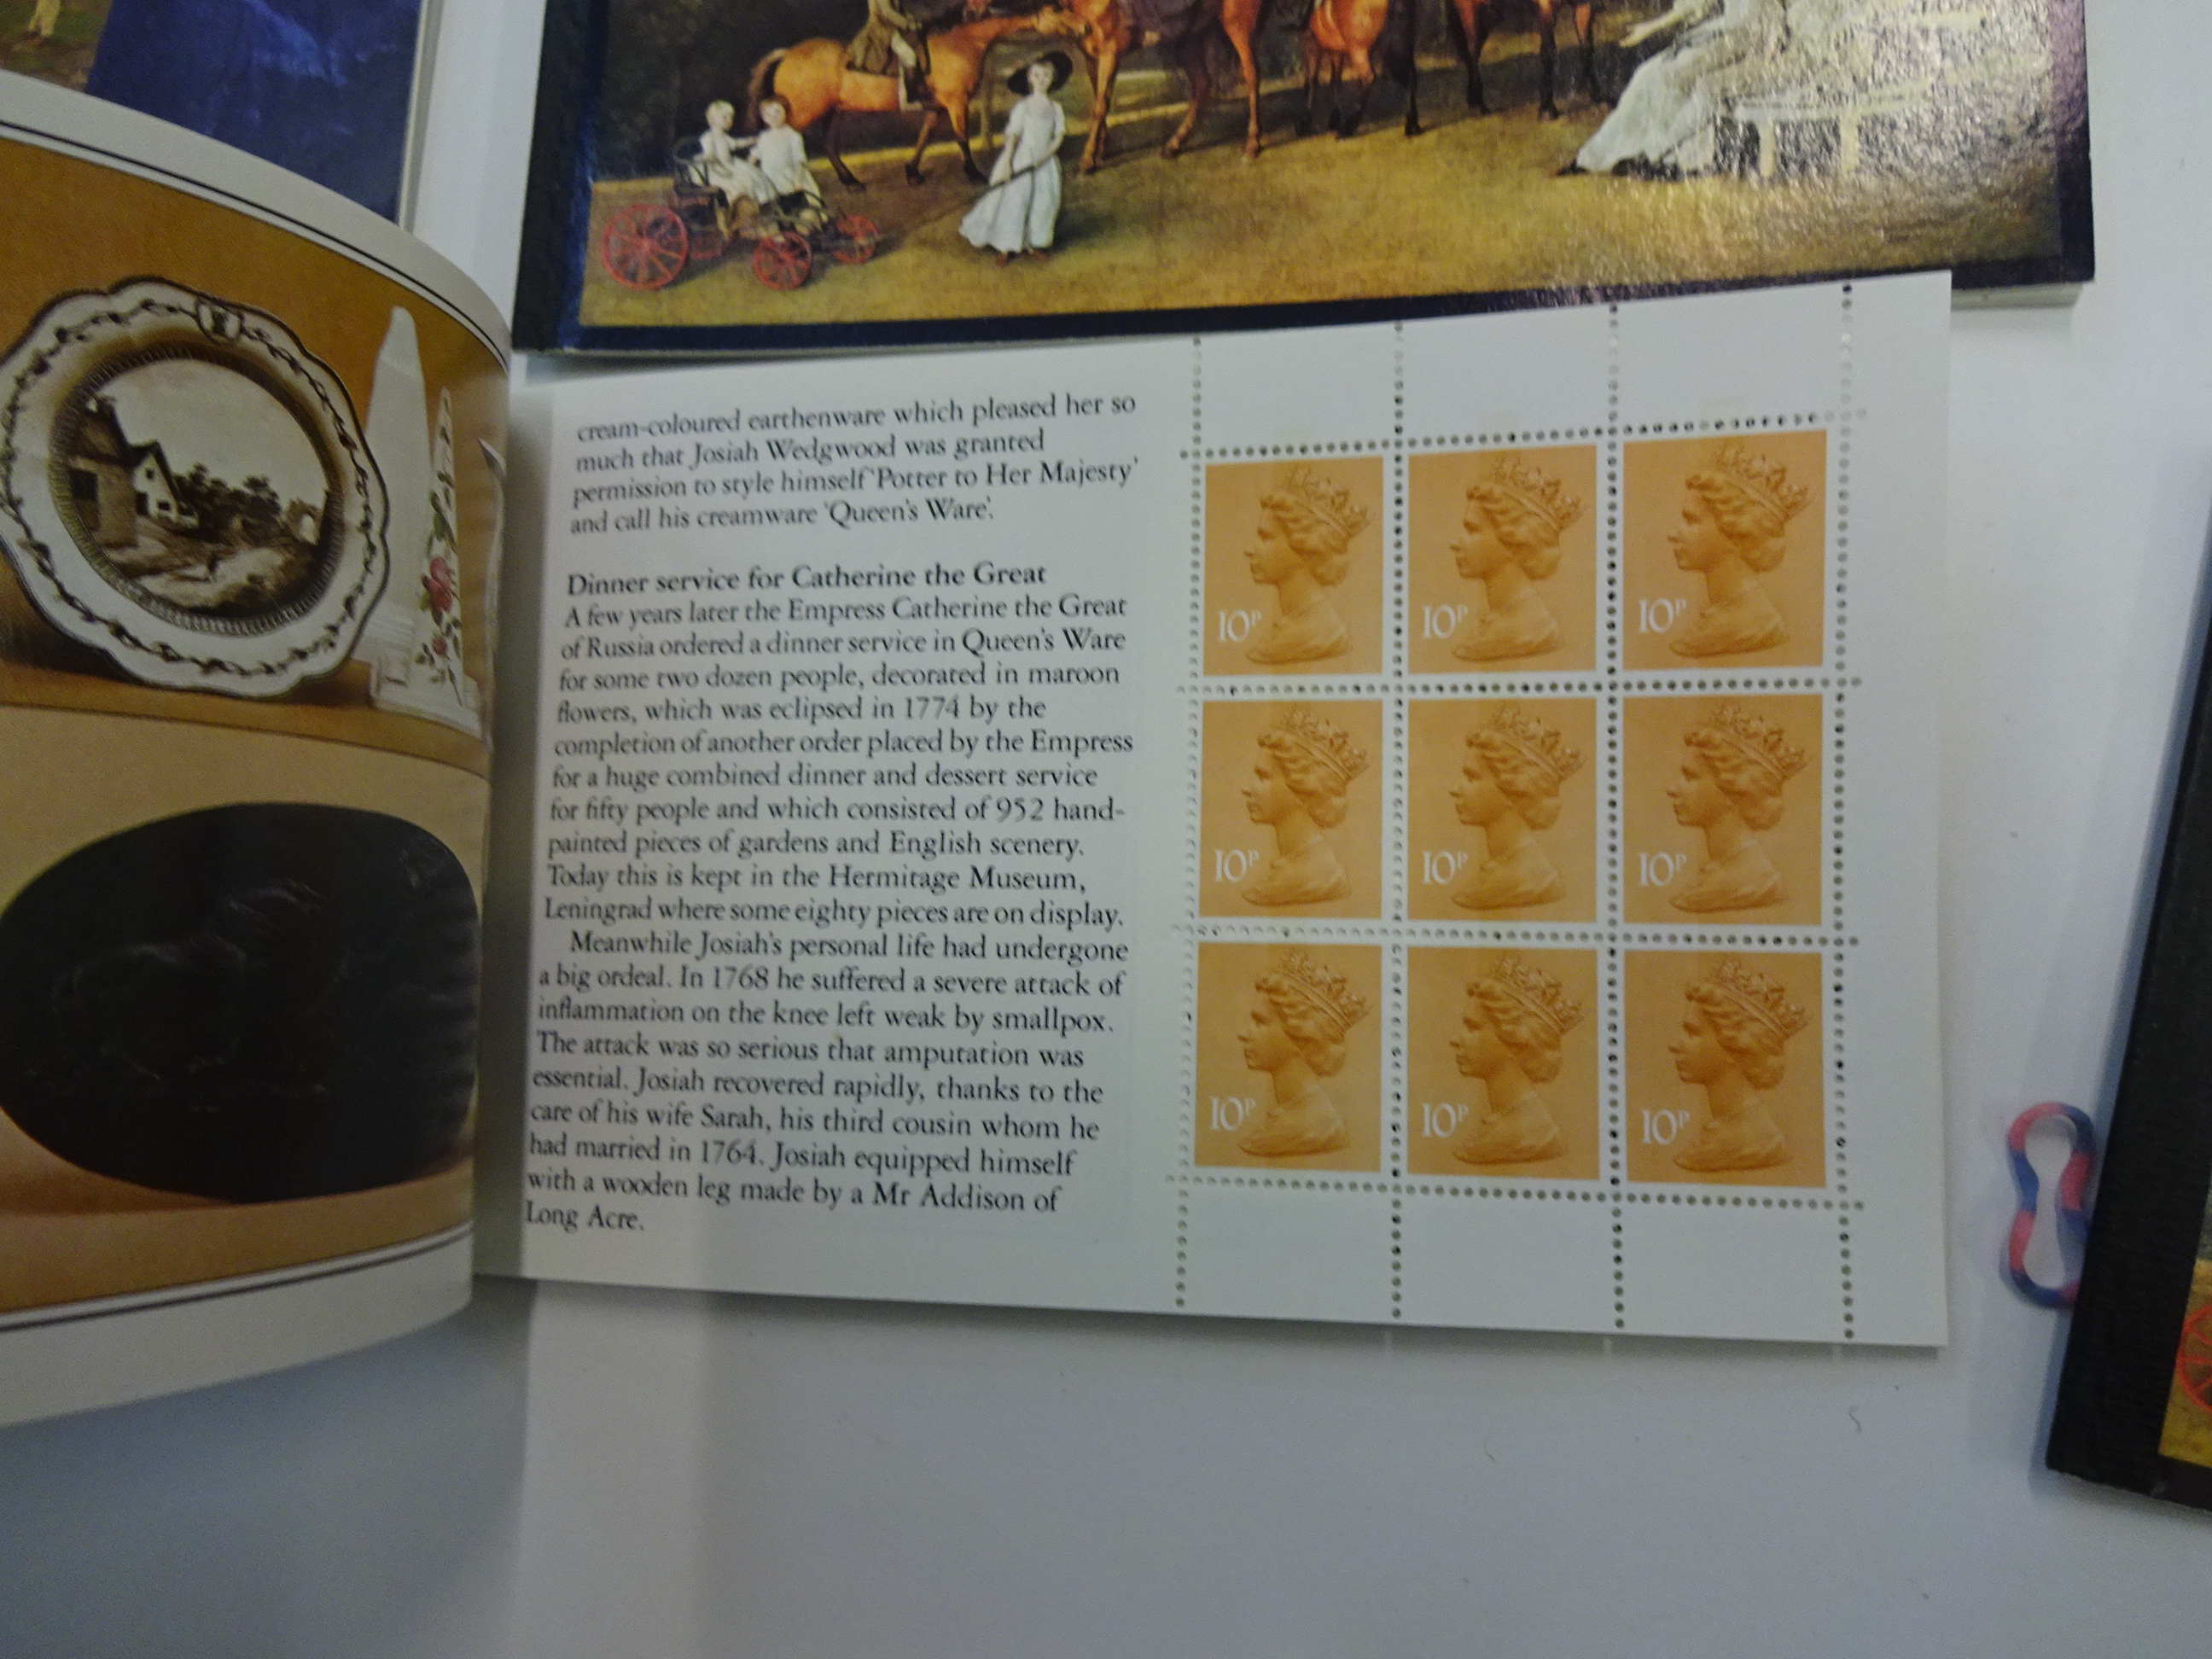 COLLECTION OF STAMPS COINS 1ST DAY COVERS INCLUDING MILITARY ROYALTY FIFA ETC. SOME UNCIRCULATED. - Image 2 of 6